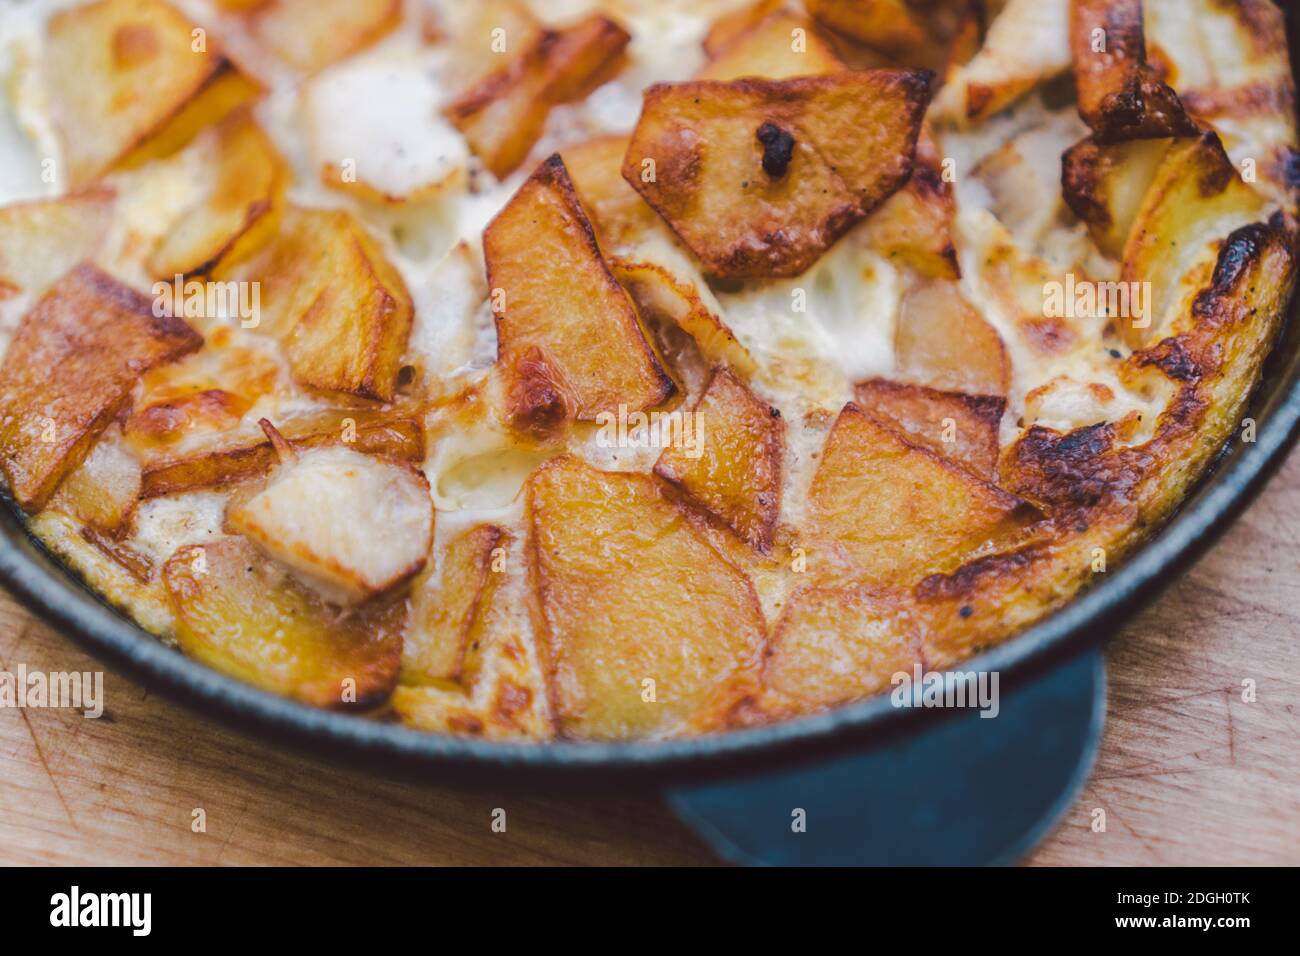 Potatoes baked with meat in the oven. Delicious dinner recipe. Potato pudding. Baked potato. Beef casserole. Potato gratin.Baked Stock Photo